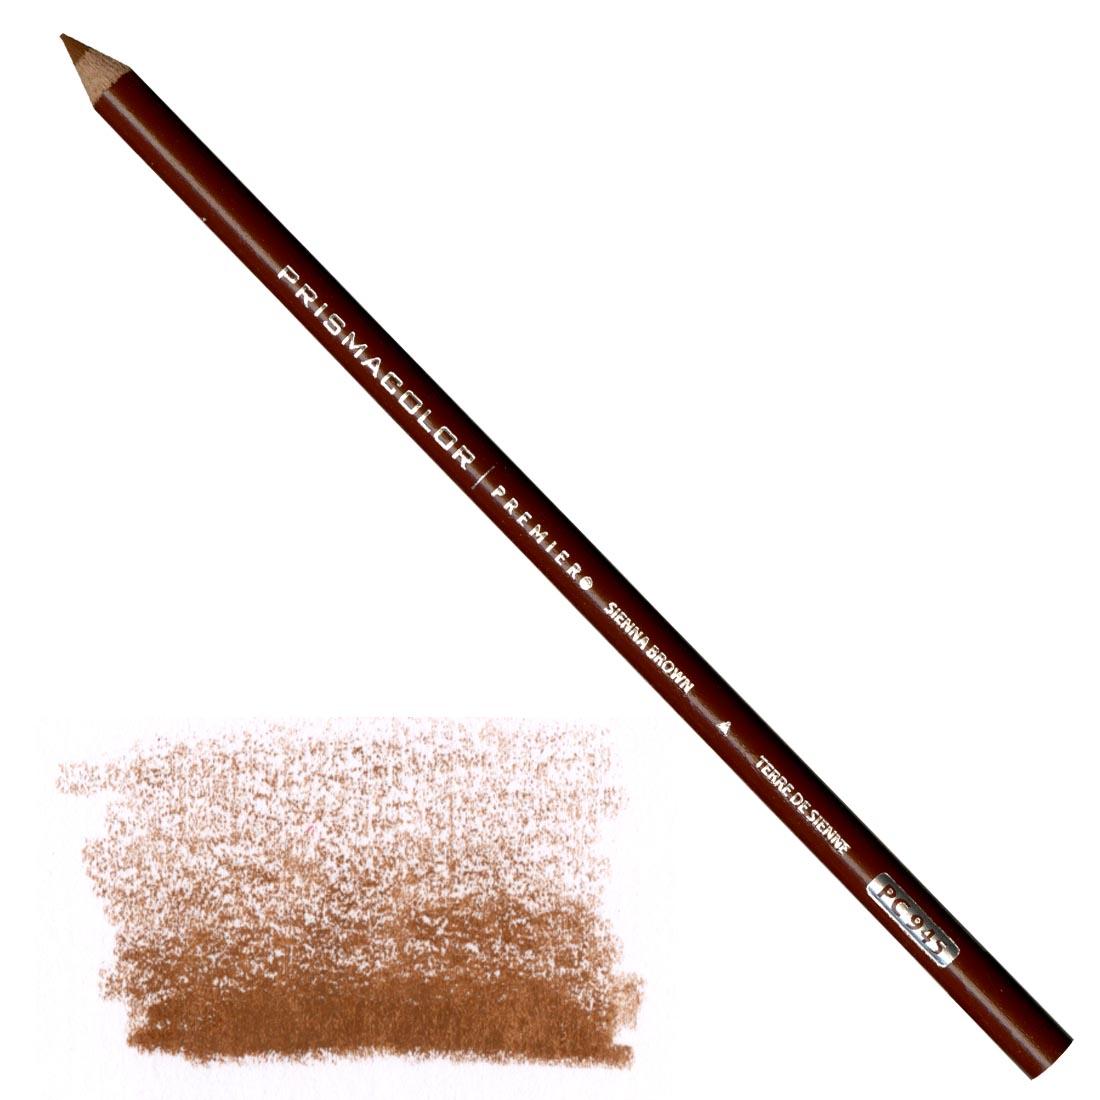 Sienna Brown Prismacolor Premier Colored Pencil with a sample colored swatch